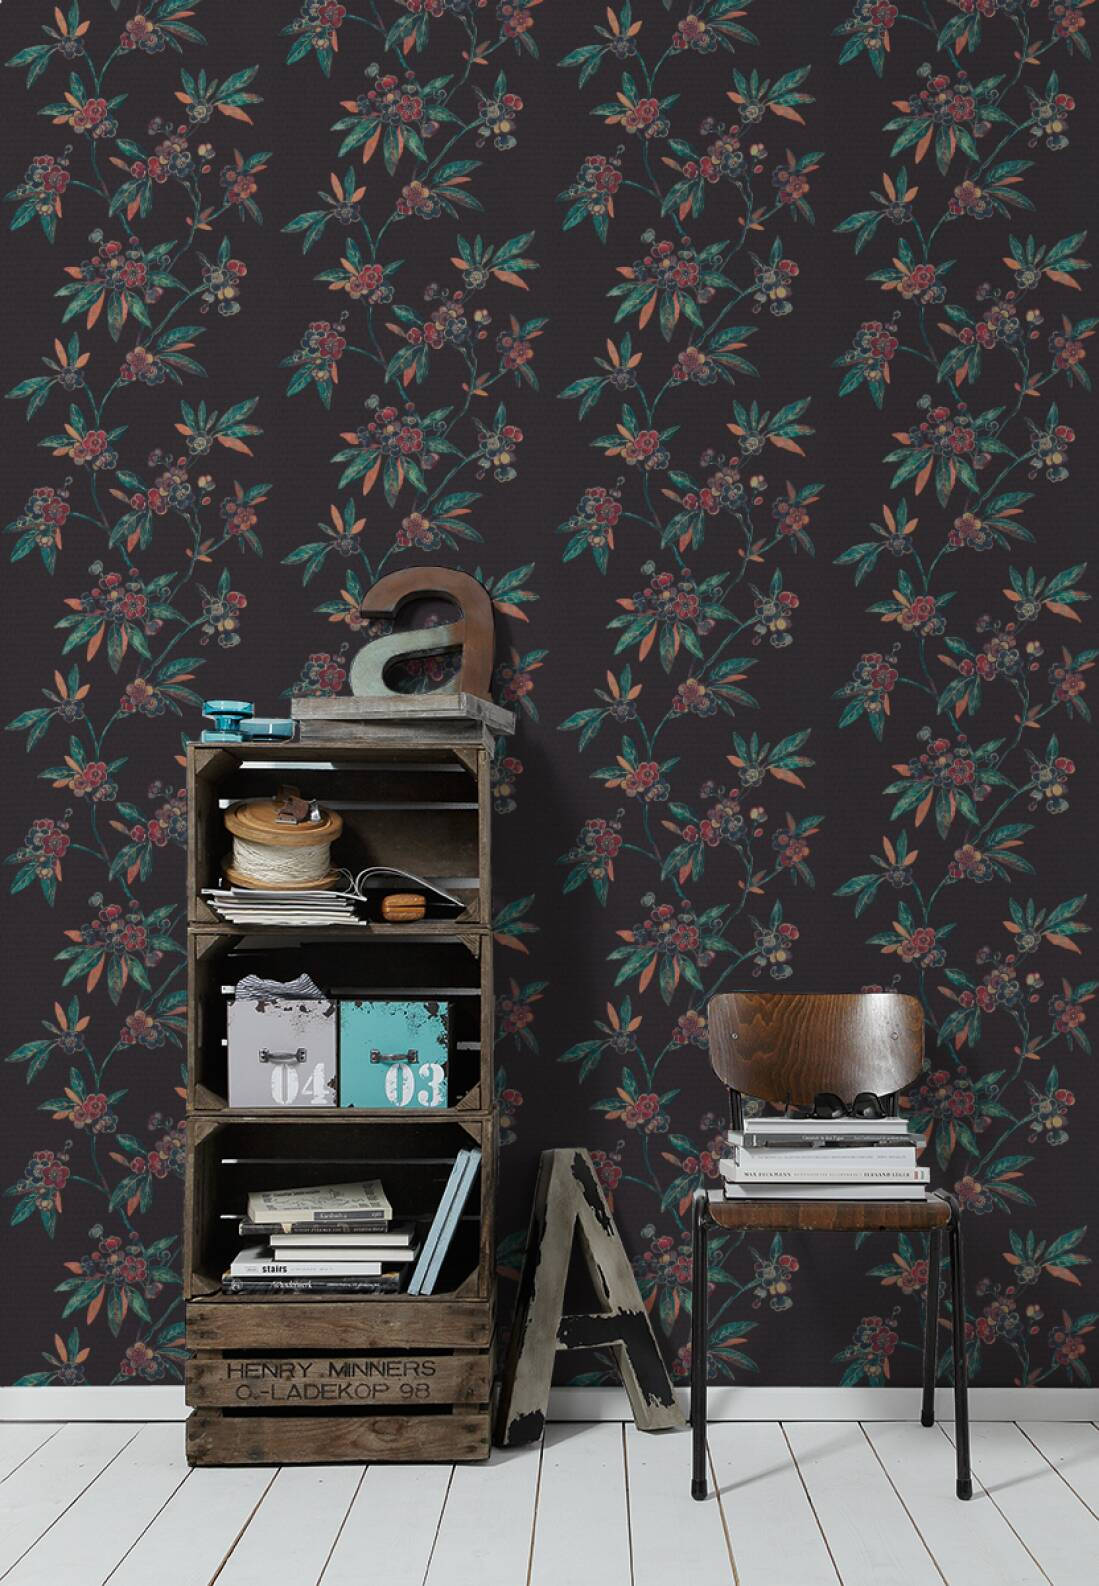 Download A Black Wall With A Floral Pattern Wallpaper | Wallpapers.com